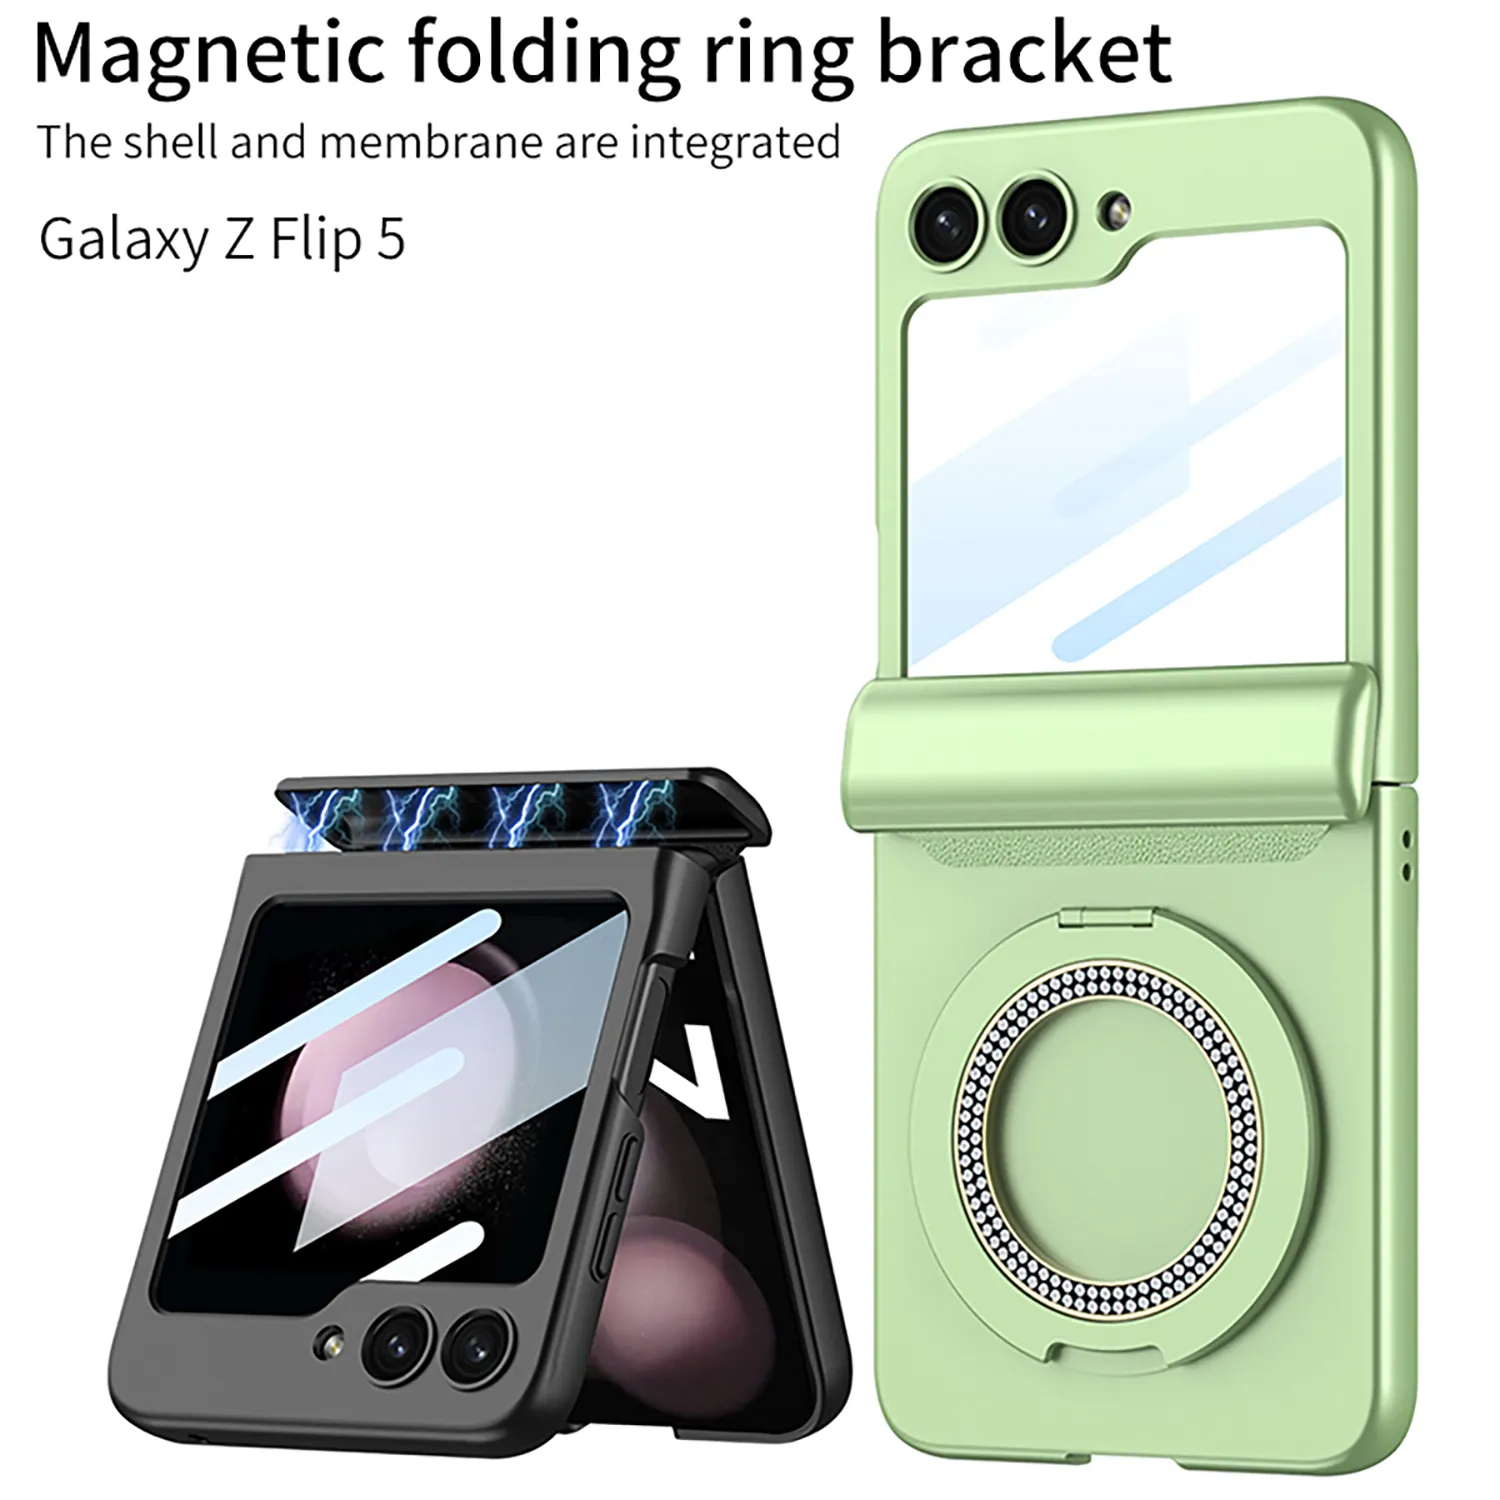 Magnetic Hinge For Samsung Galaxy Z Flip 5 4 3 Flip4 Flip3 Case Diamond Ring Stand Film Protection Cover